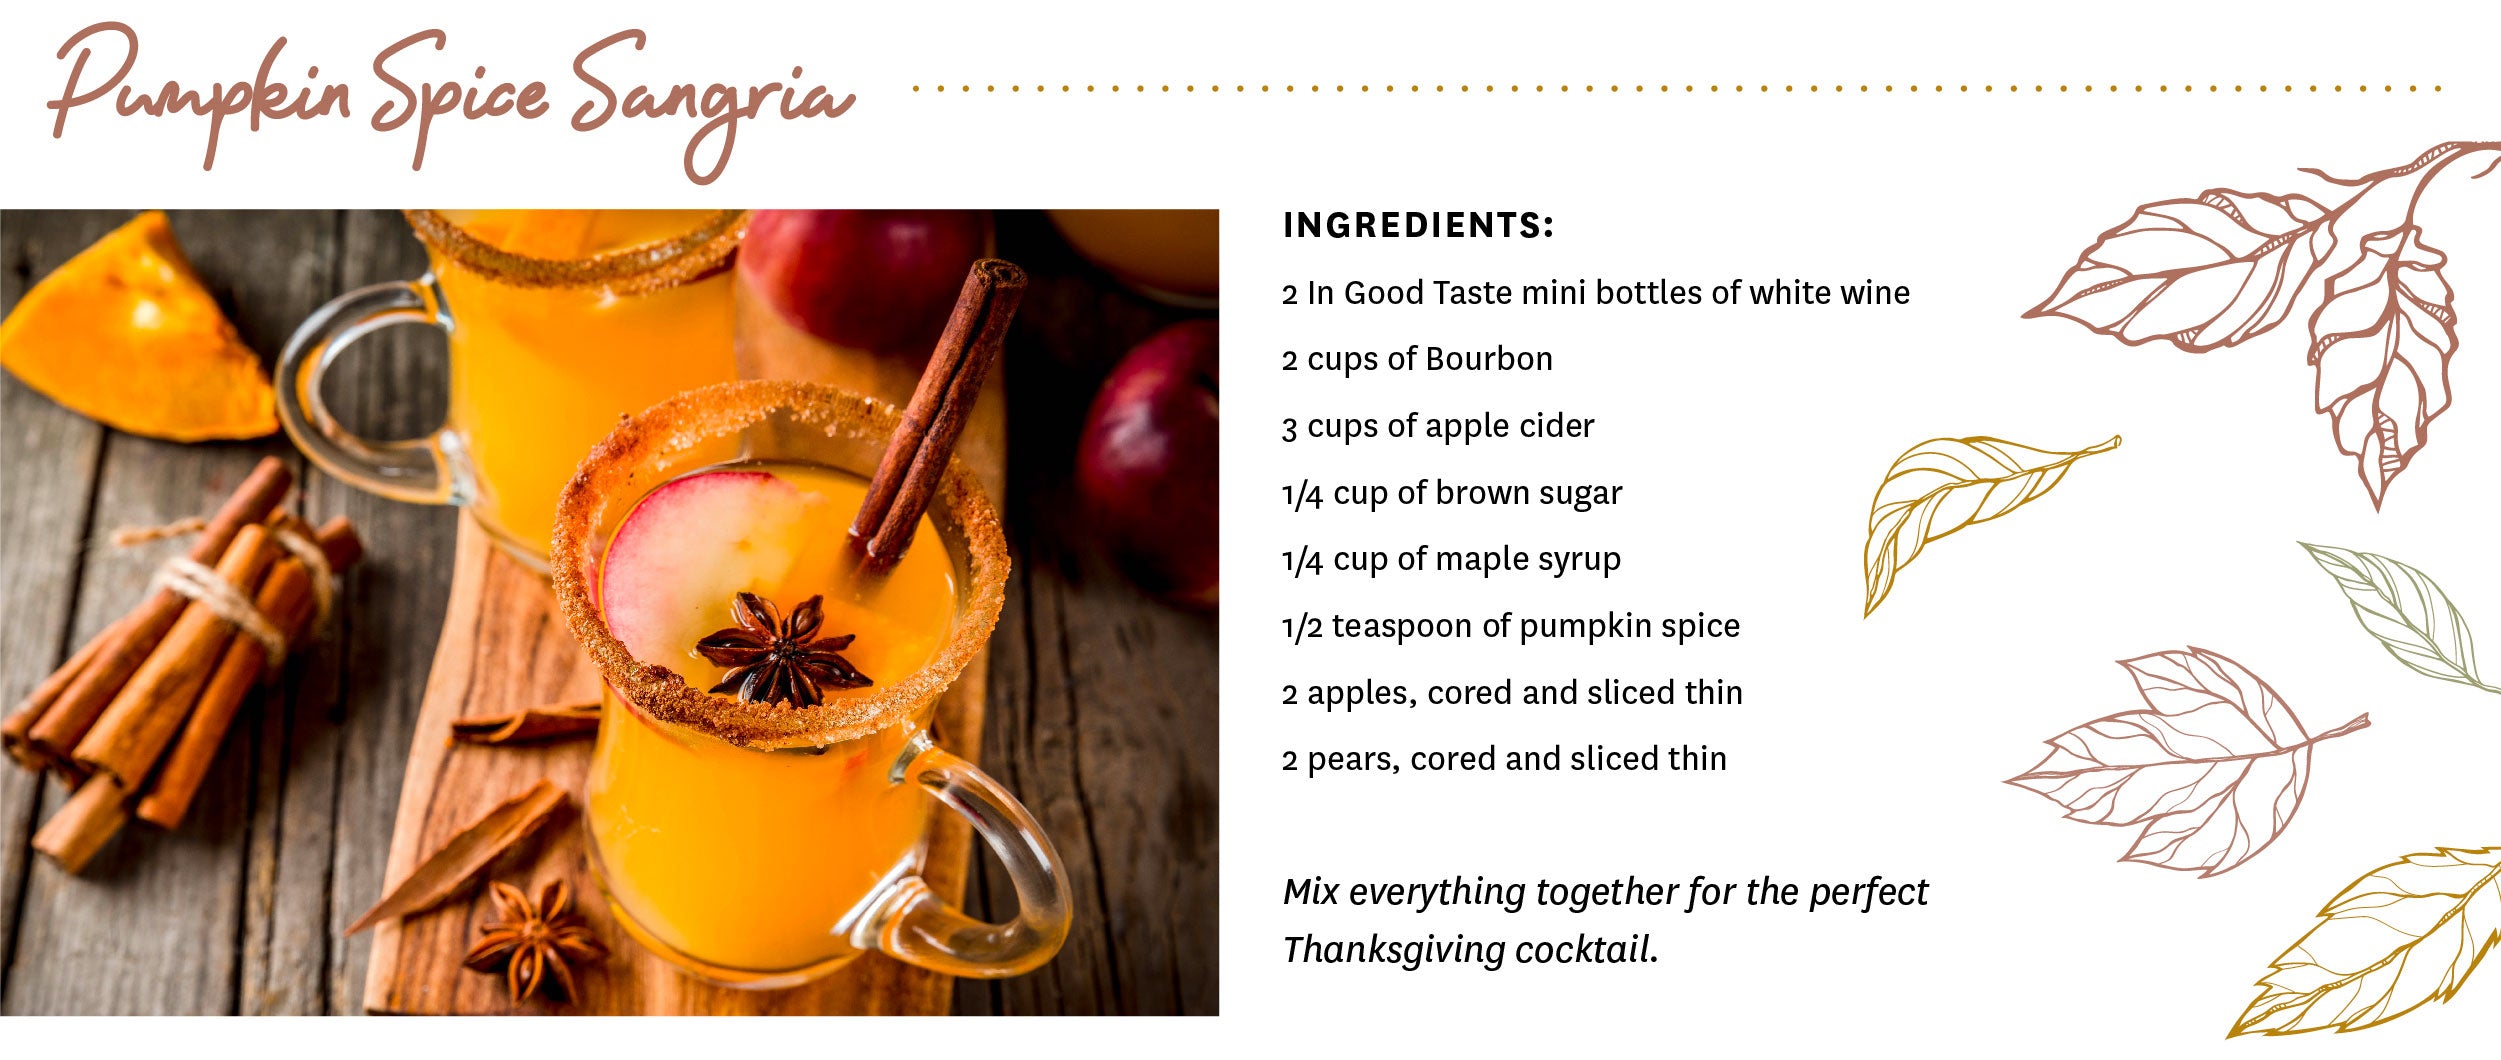 Pumpkin Spice Sangria Recipe using Dry White Wine, Bourbon, apple cider, brown sugar, maple syrup, pumpkin spice, applies and pears. Mix it all together for the perfect Thanksgiving cocktail.